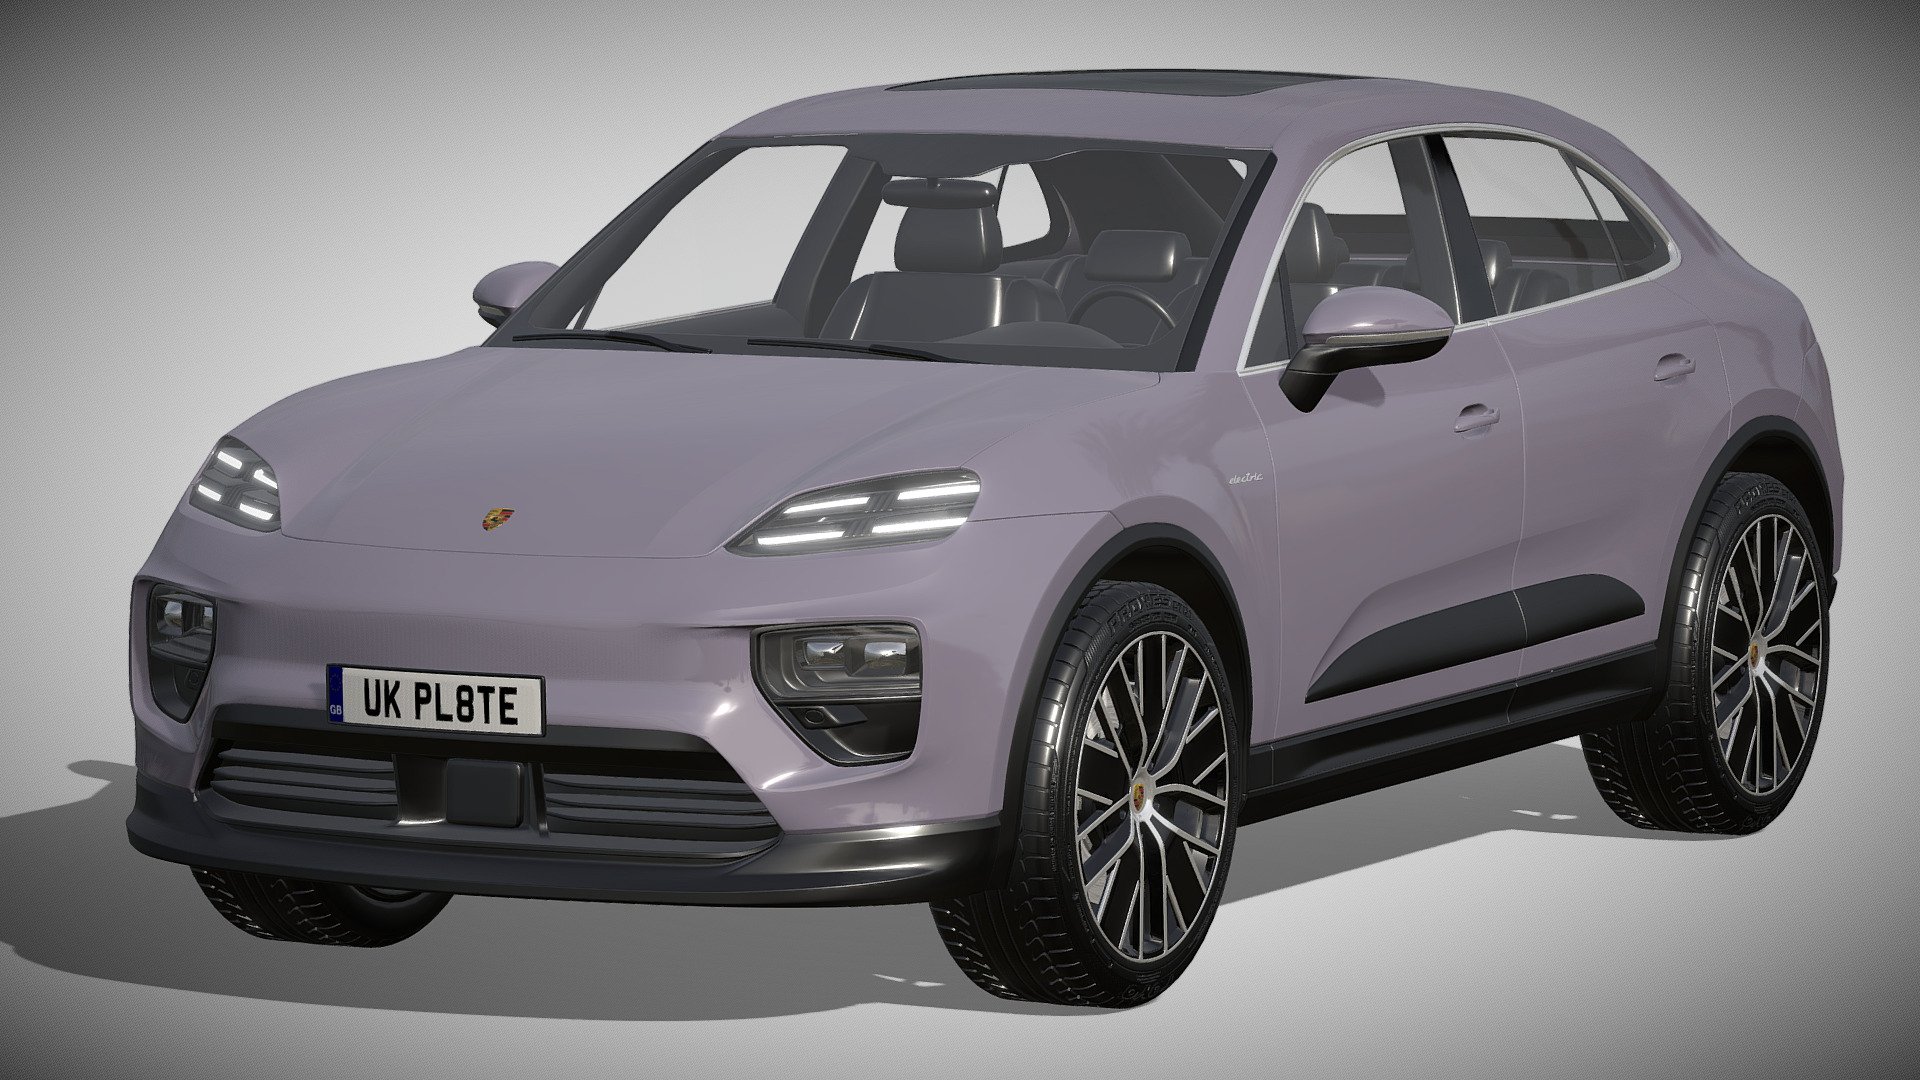 Porsche Macan 4 Electric

https://www.porsche.com/germany/models/macan/macan-electric-models/macan-4-electric/

Clean geometry Light weight model, yet completely detailed for HI-Res renders. Use for movies, Advertisements or games

Corona render and materials

All textures include in *.rar files

Lighting setup is not included in the file! - Porsche Macan 4 Electric - Buy Royalty Free 3D model by zifir3d 3d model